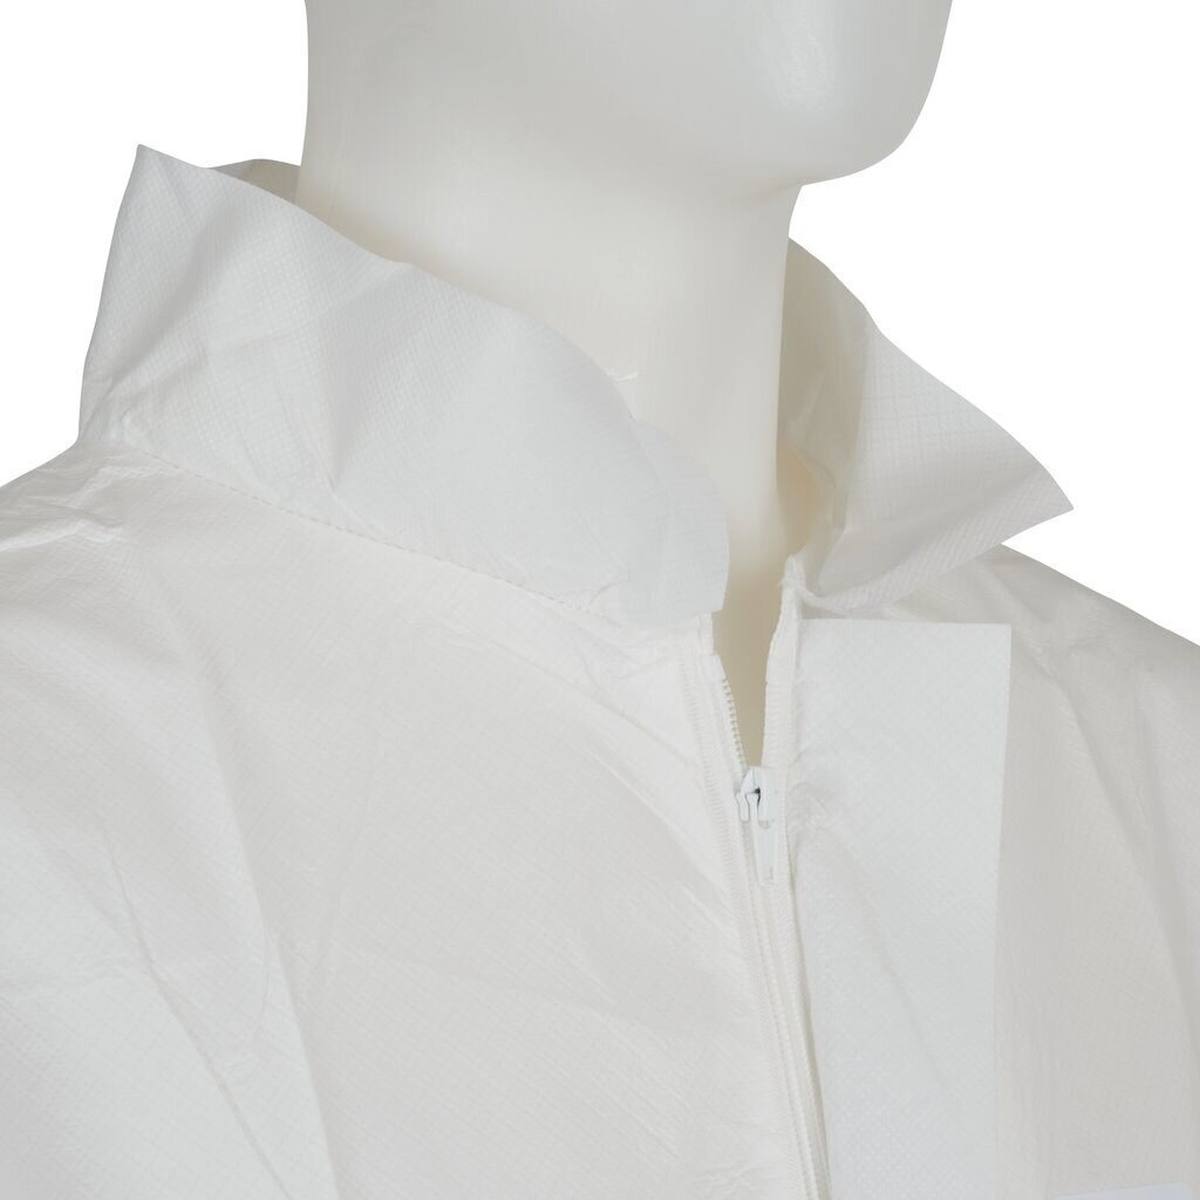 3M 4440 coat, white, size M, particularly breathable, very light, with zipper, knitted cuffs